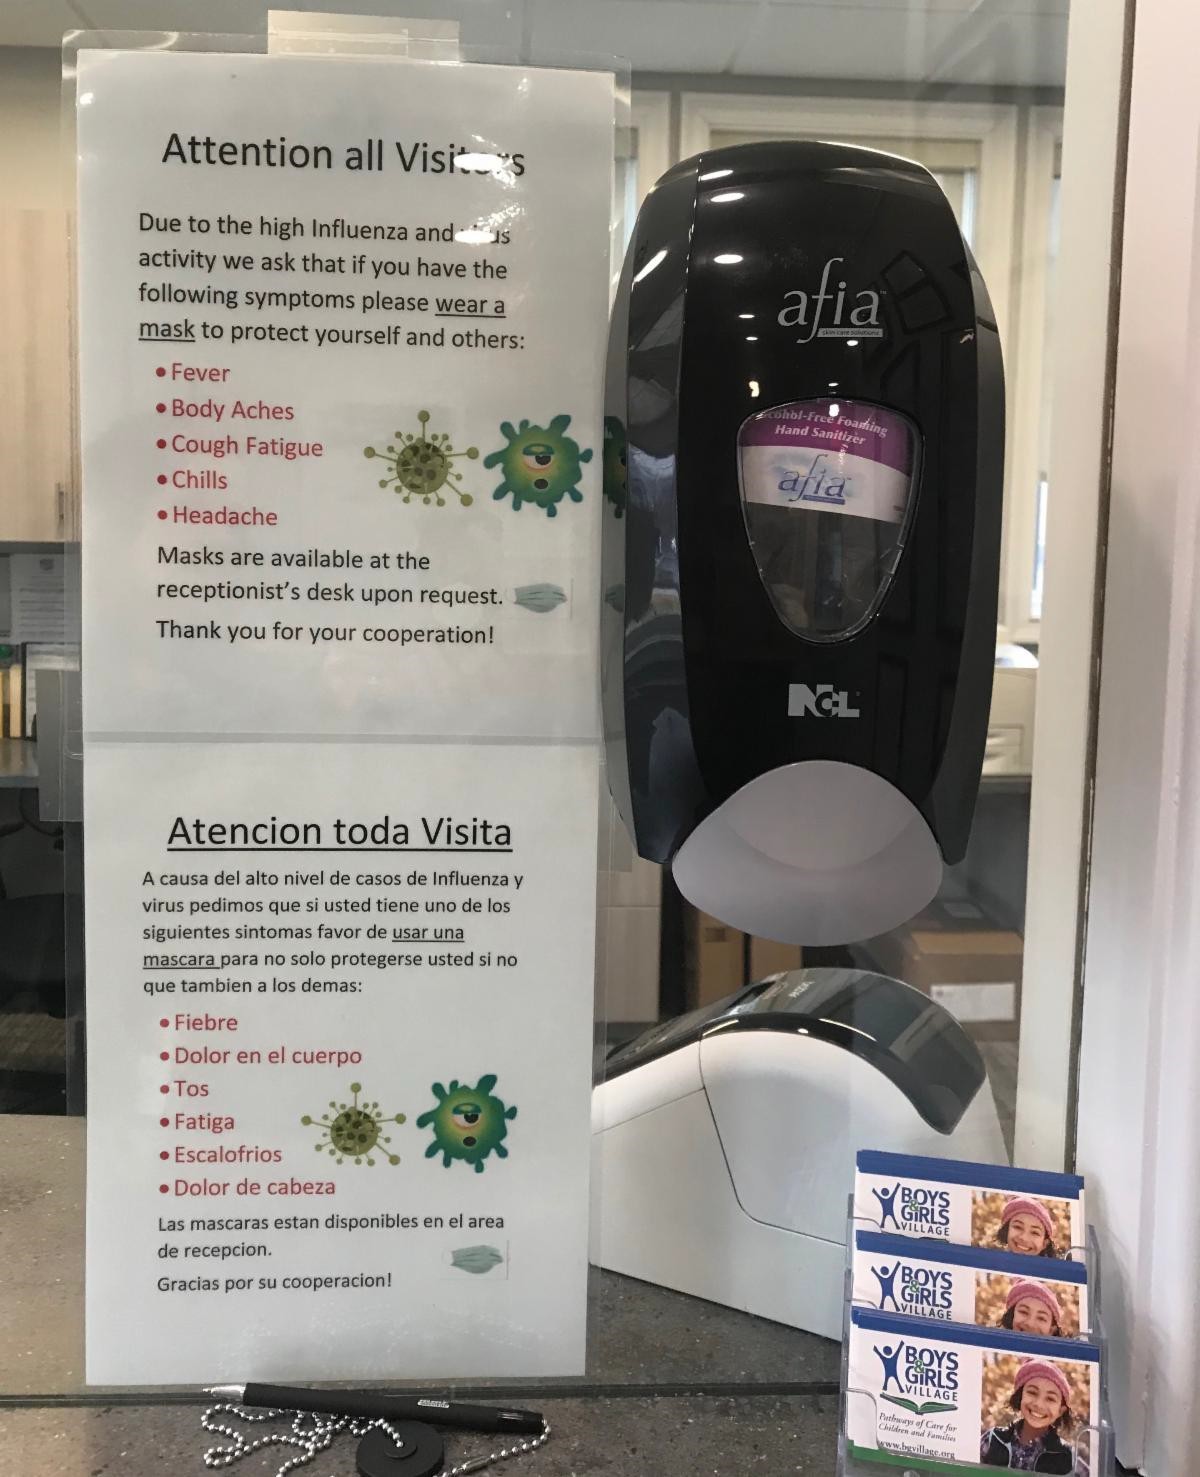 Hand sanitizer dispensers have been installed throughout our agency and our facilities staff is providing extra daily cleanings.